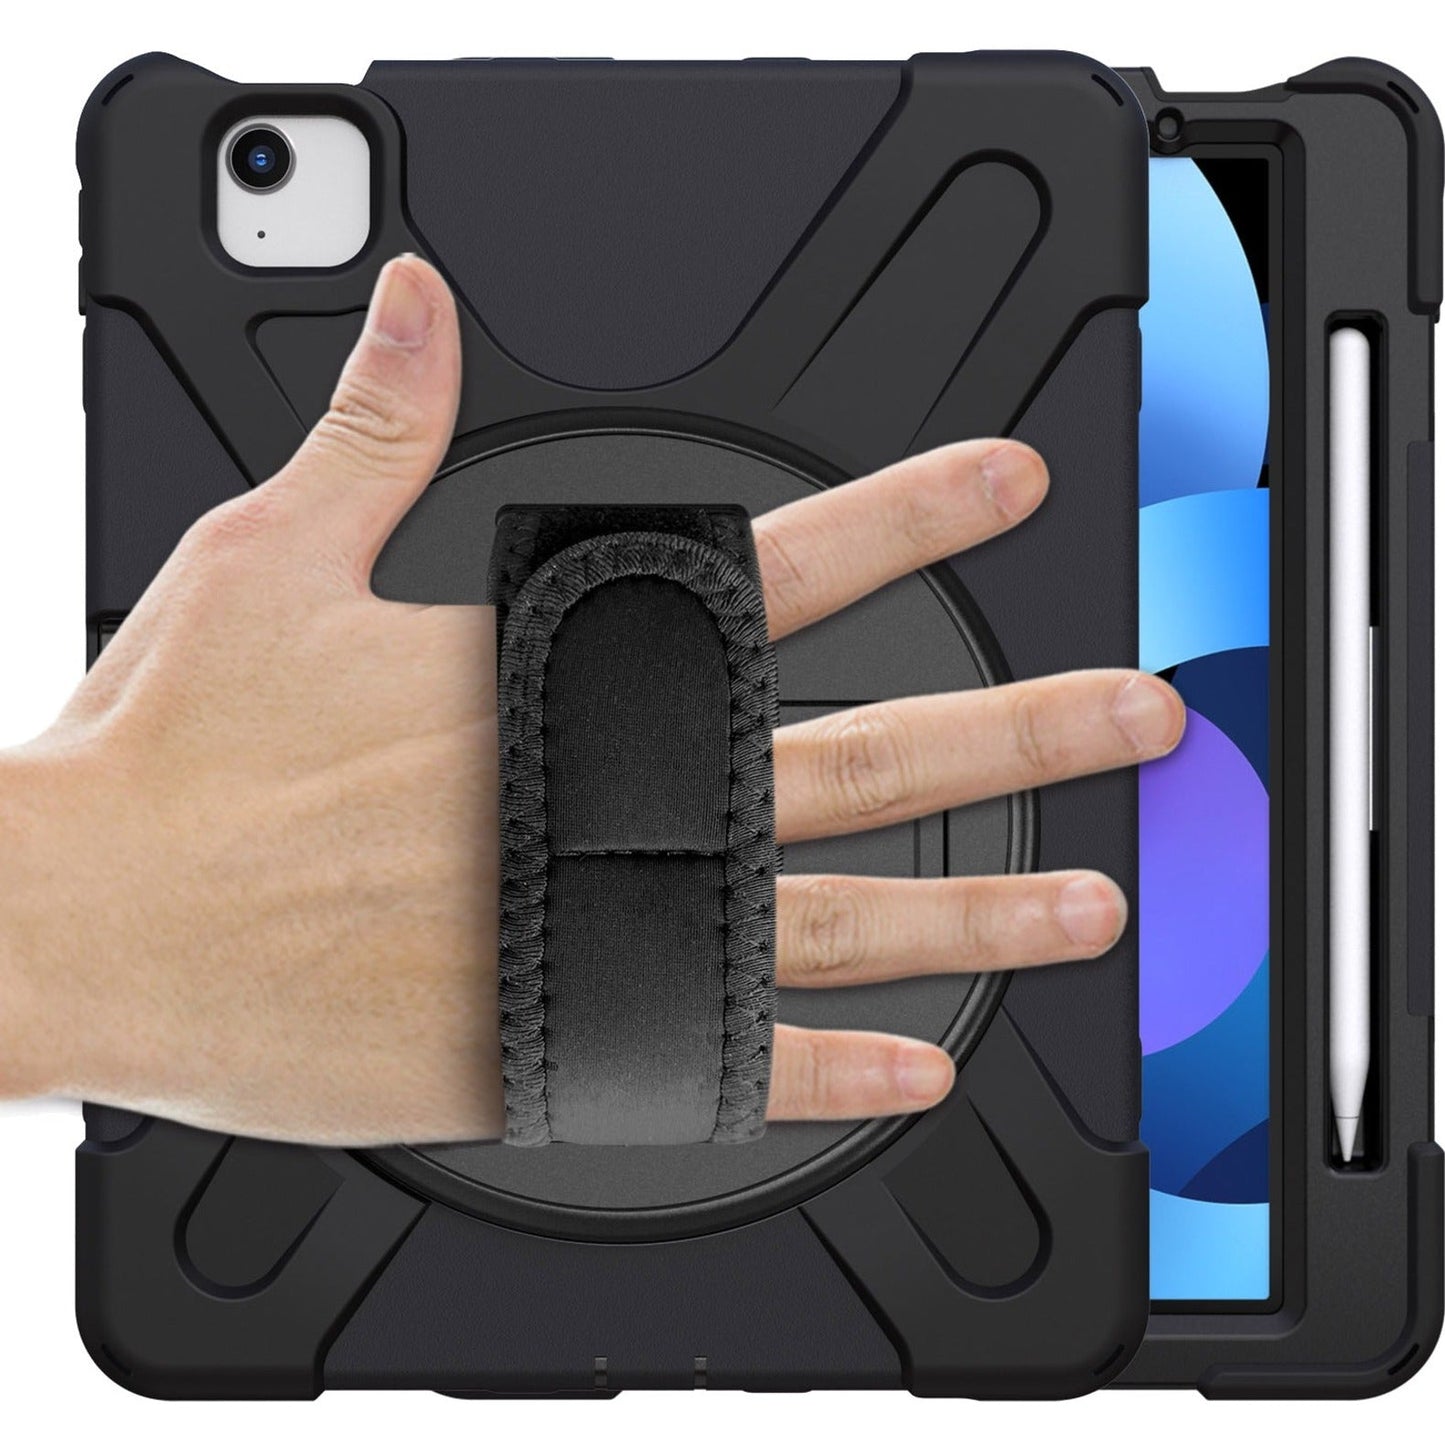 CODi Rugged Carrying Case for iPad Air 10.9" (Gen 4 5)